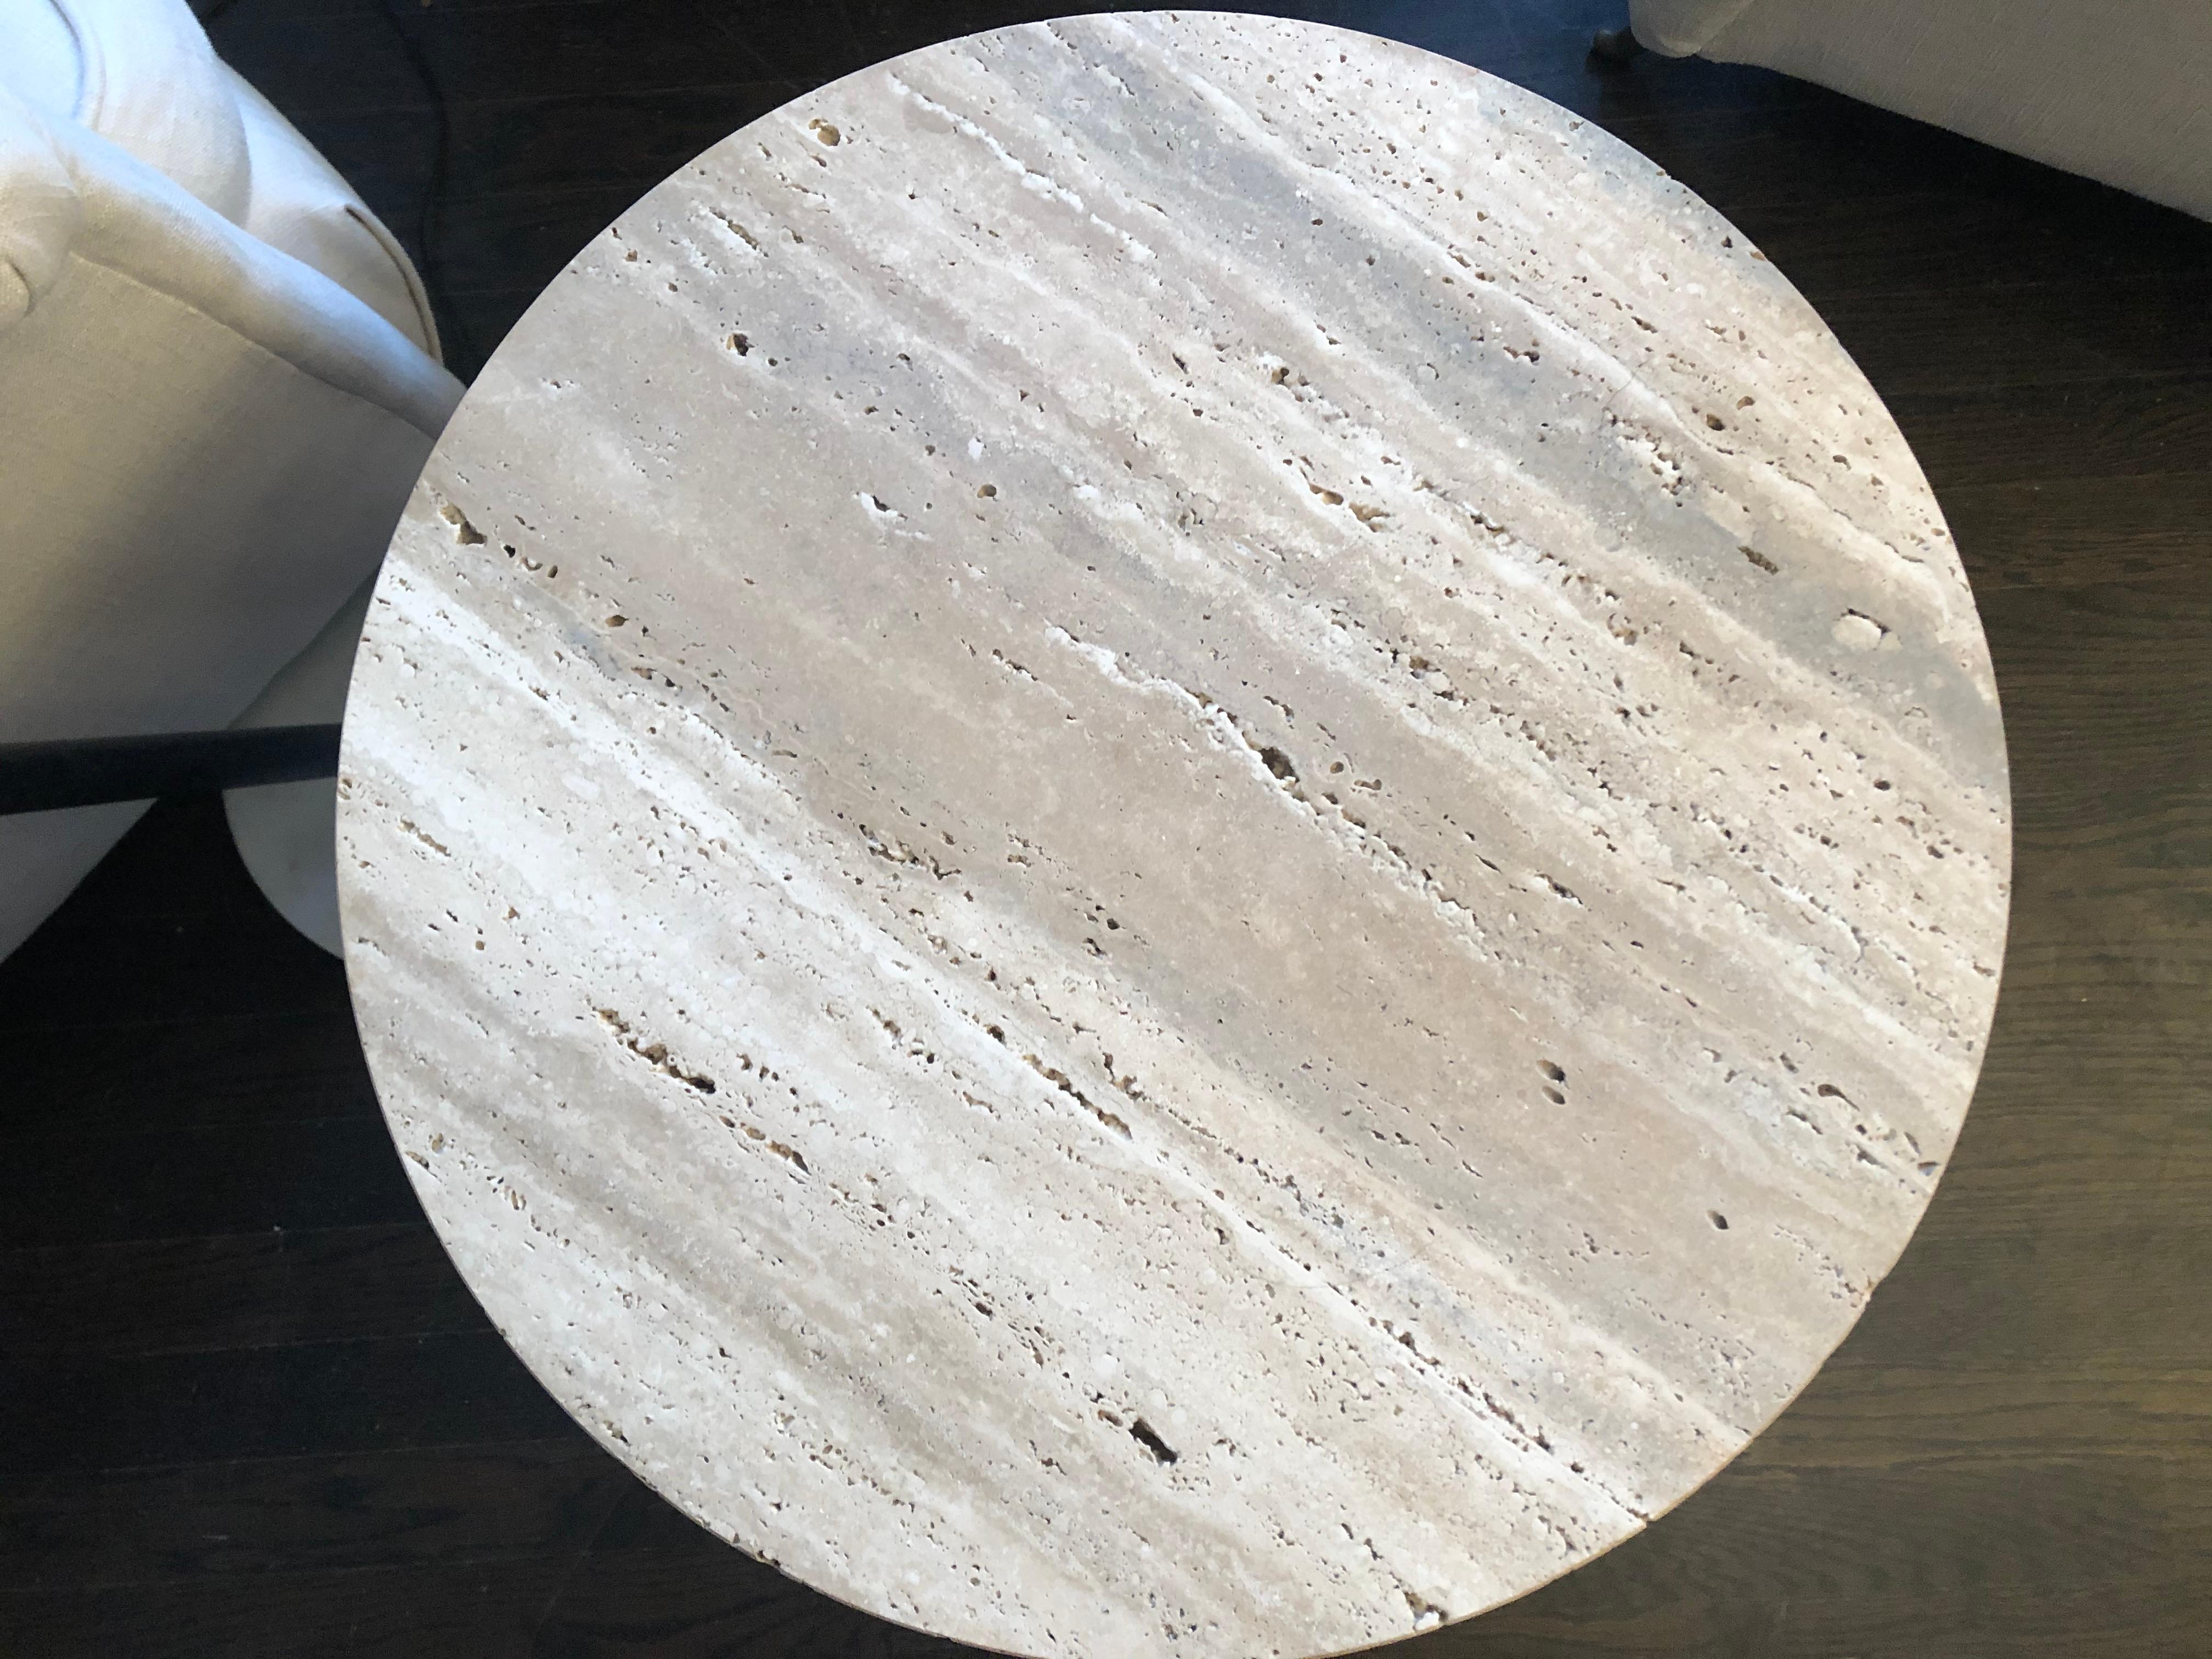 Silver travertine marble side table by Le Lampade
Designed and Made in Italy
Round travertine top on an hexagonal base.
Base and top can be custom made up on request.